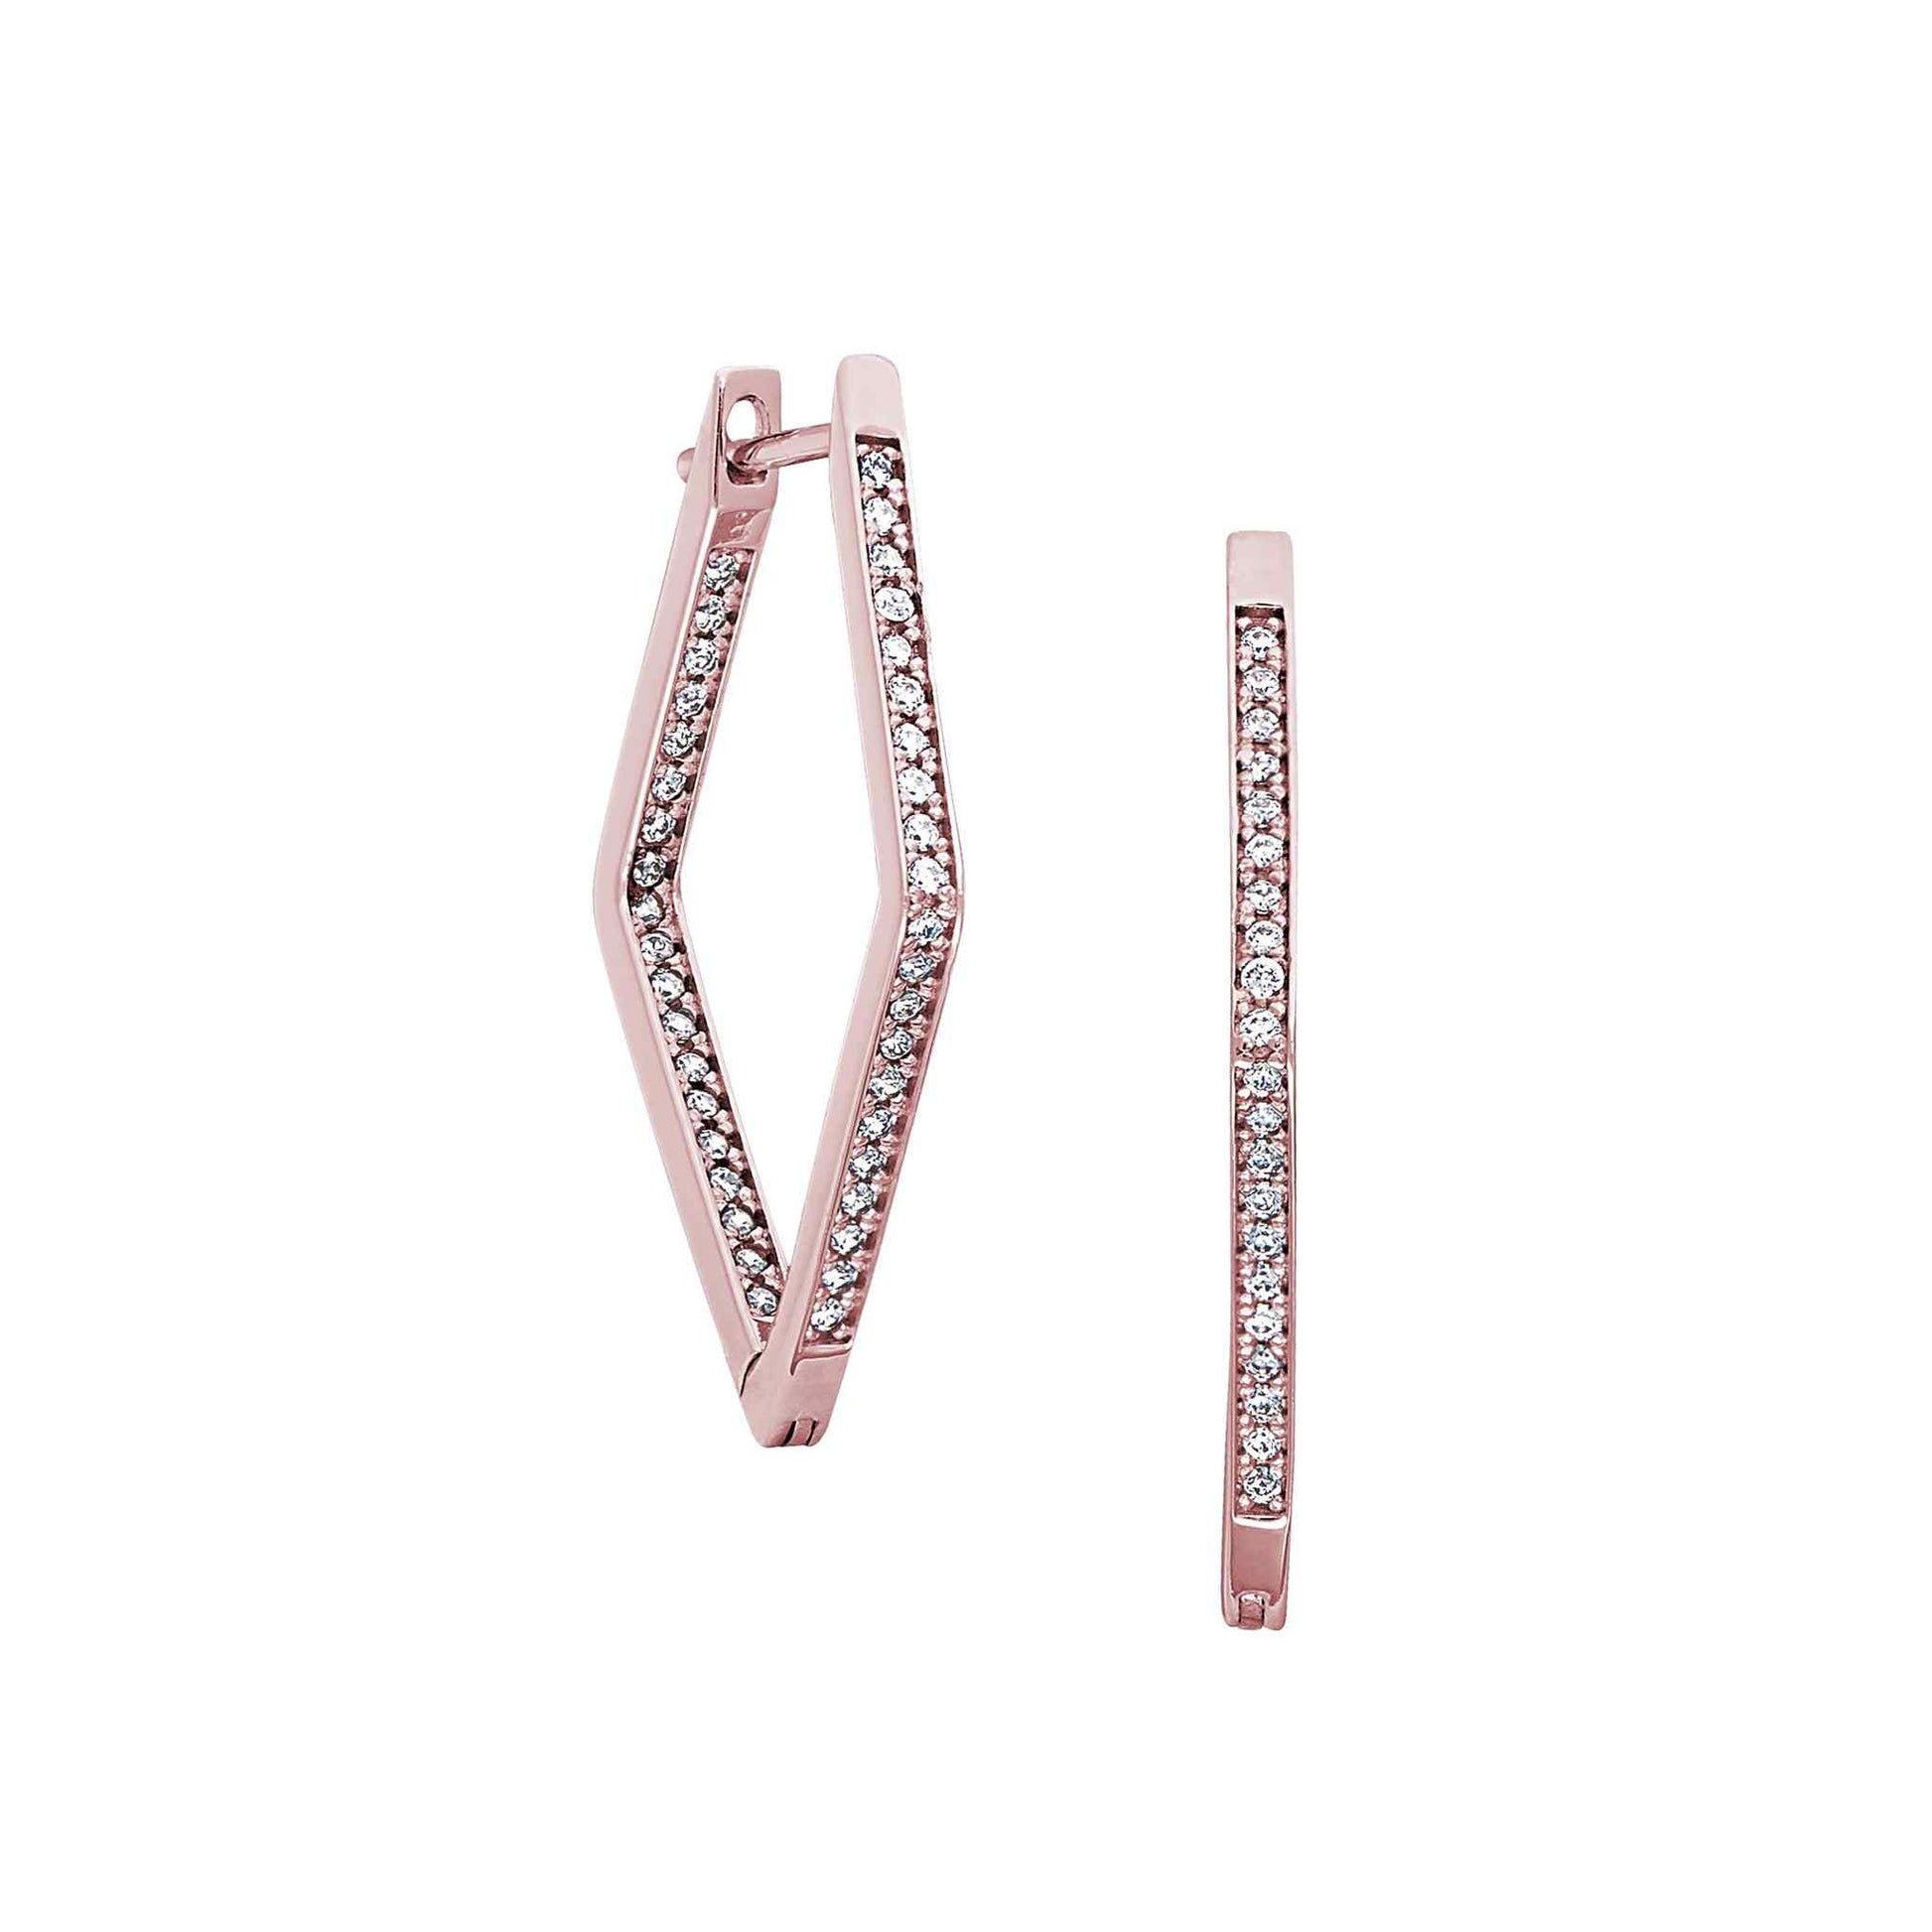 A diamond shaped hoop earrings with simulated diamonds displayed on a neutral white background.